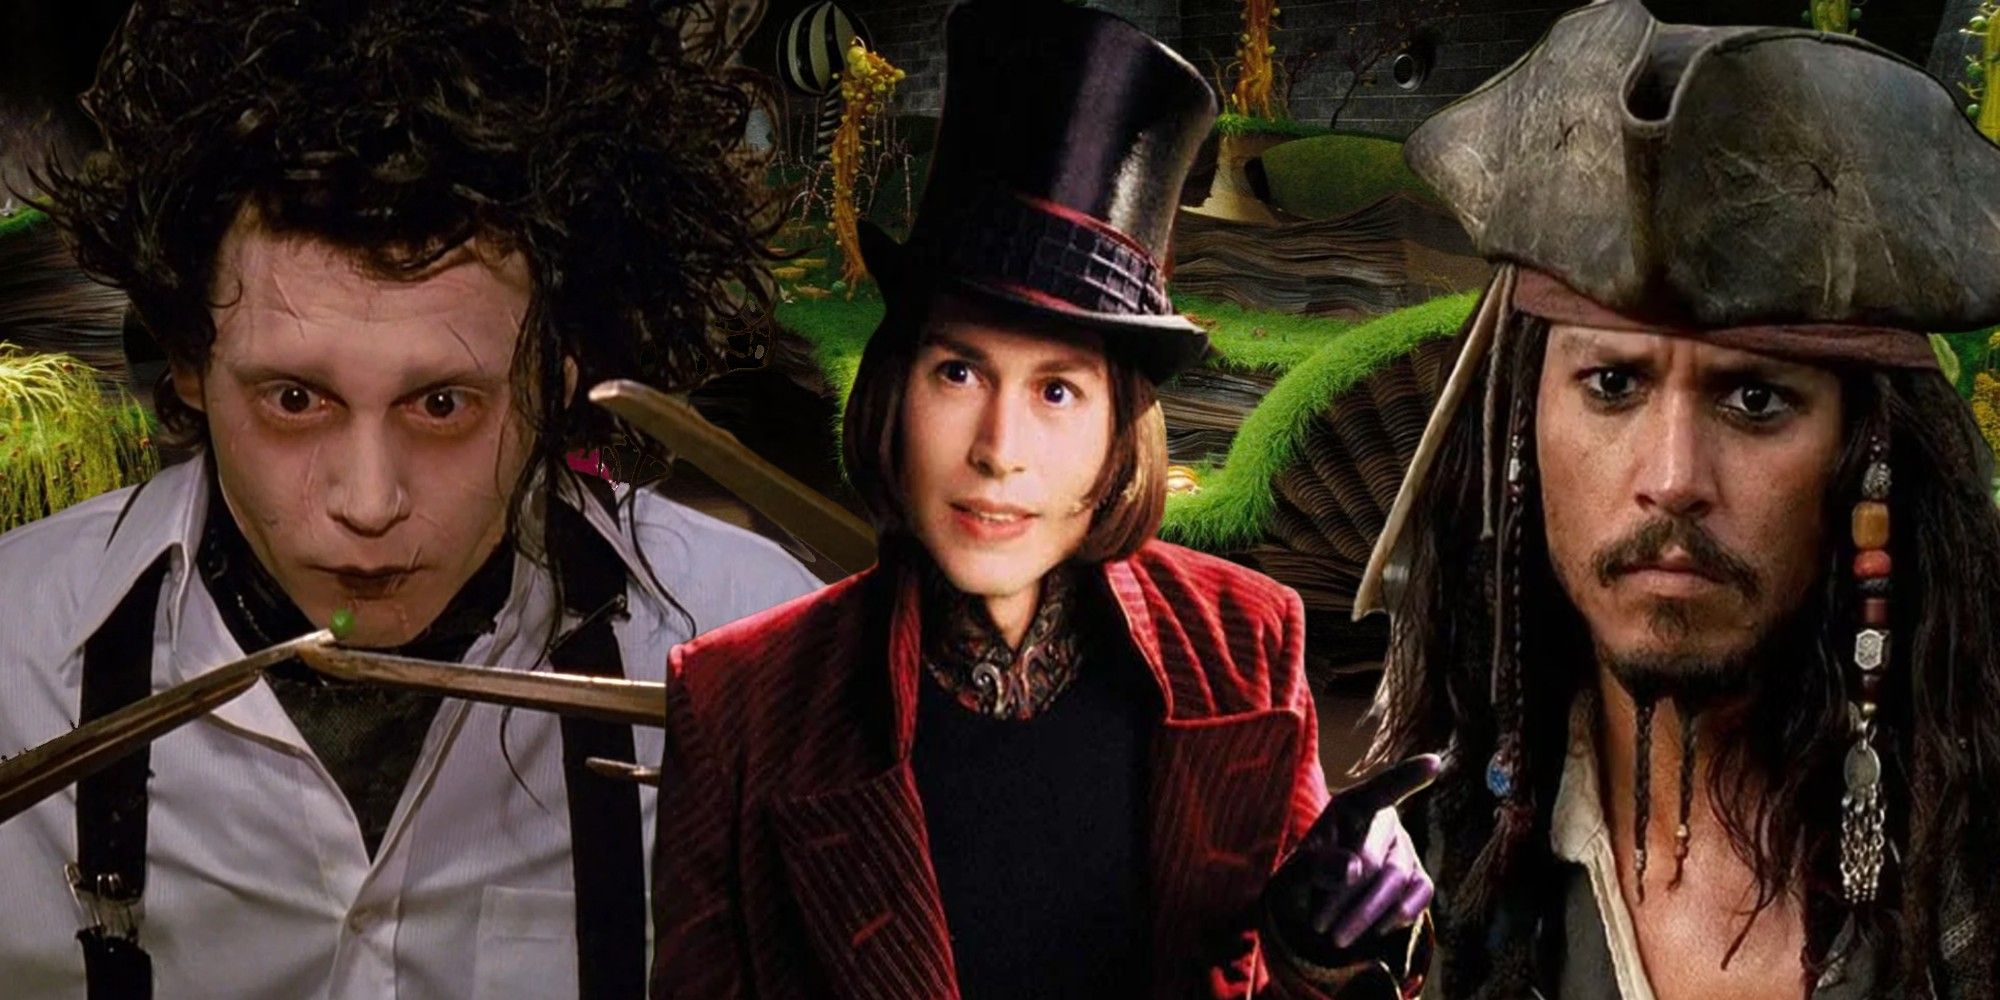 Collage image of Johnny Depp as Edward Scissorhands, Willy Wonka, and Jack Sparrow